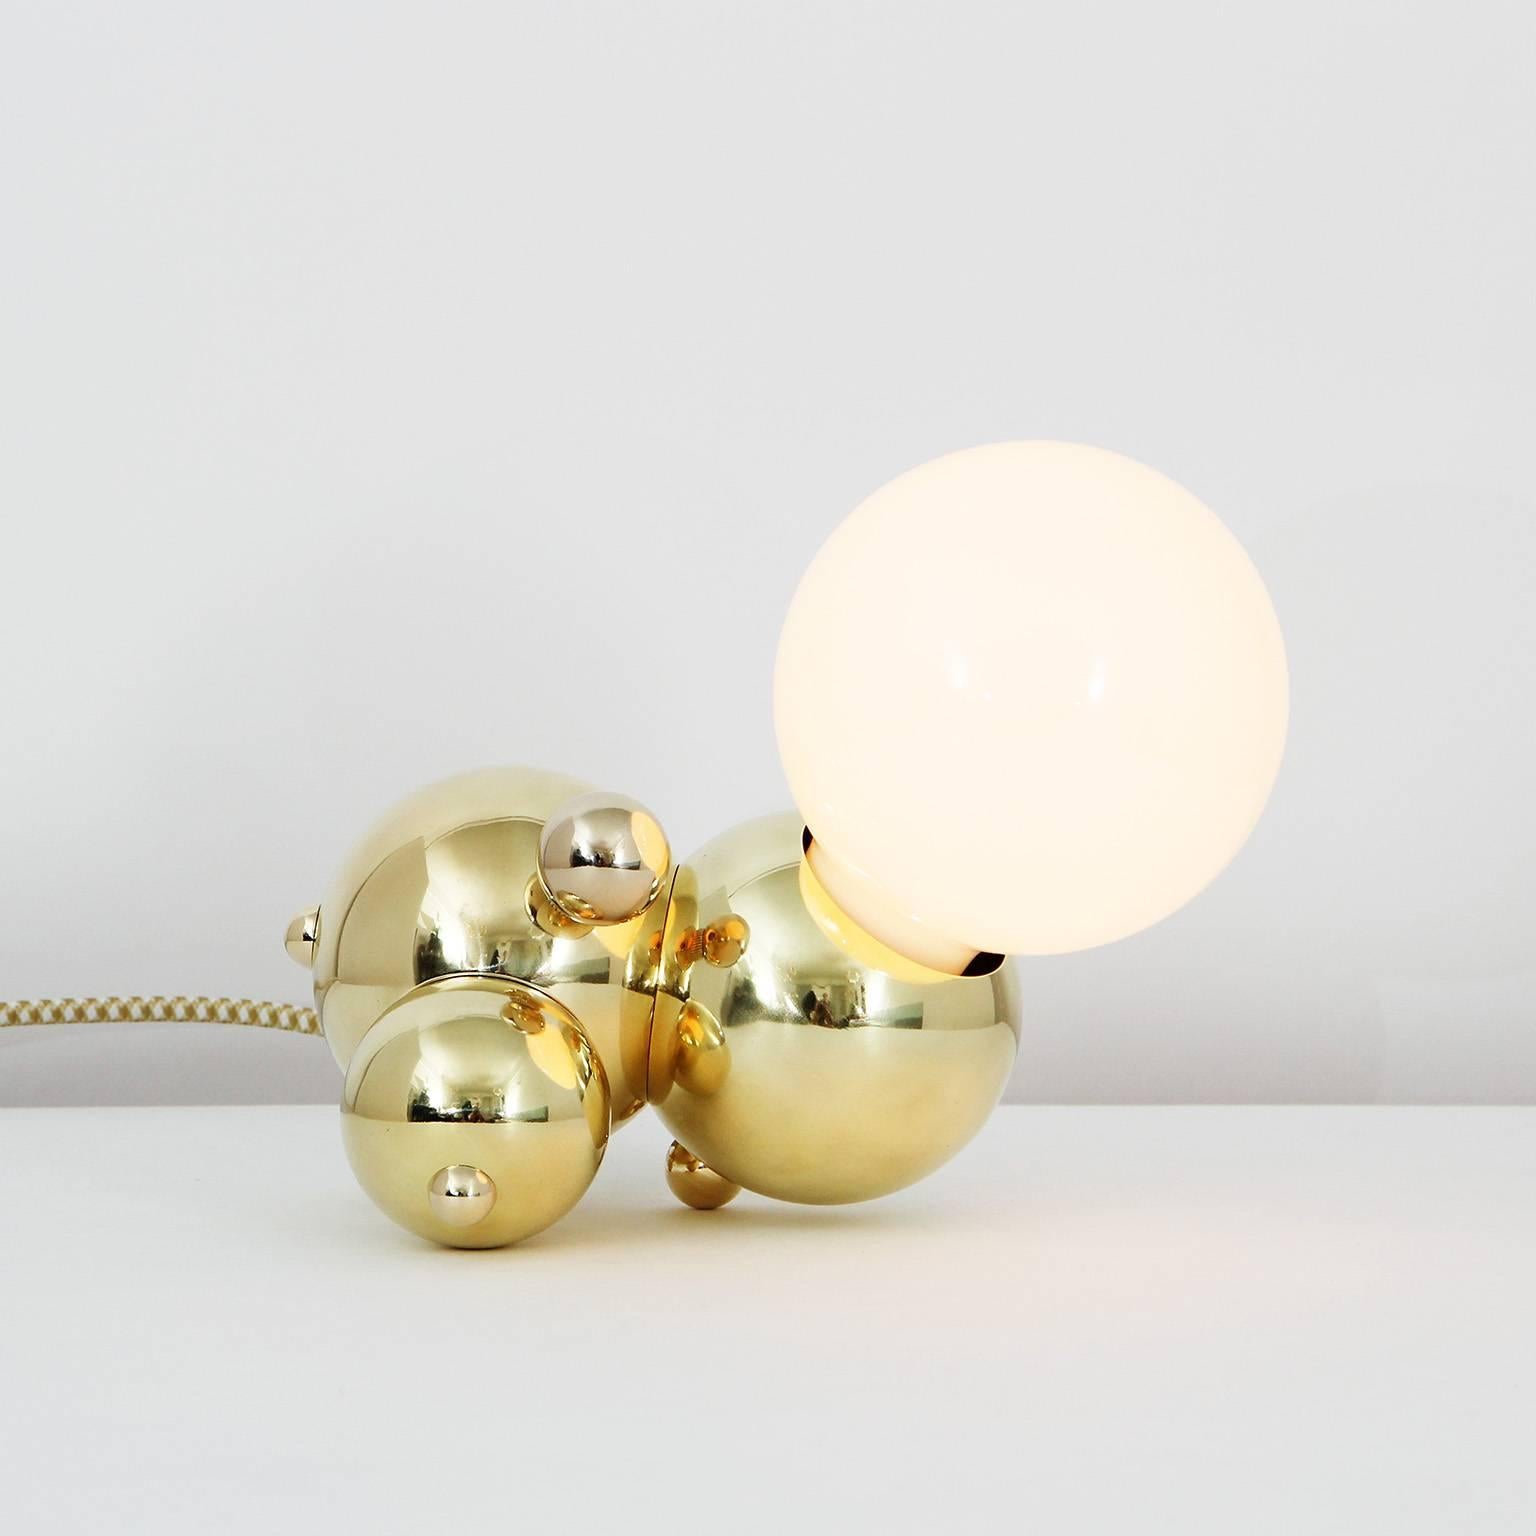 Modern Bubbly 01-Light Small Sculptural Table or Desk Lamp in Polished Brass